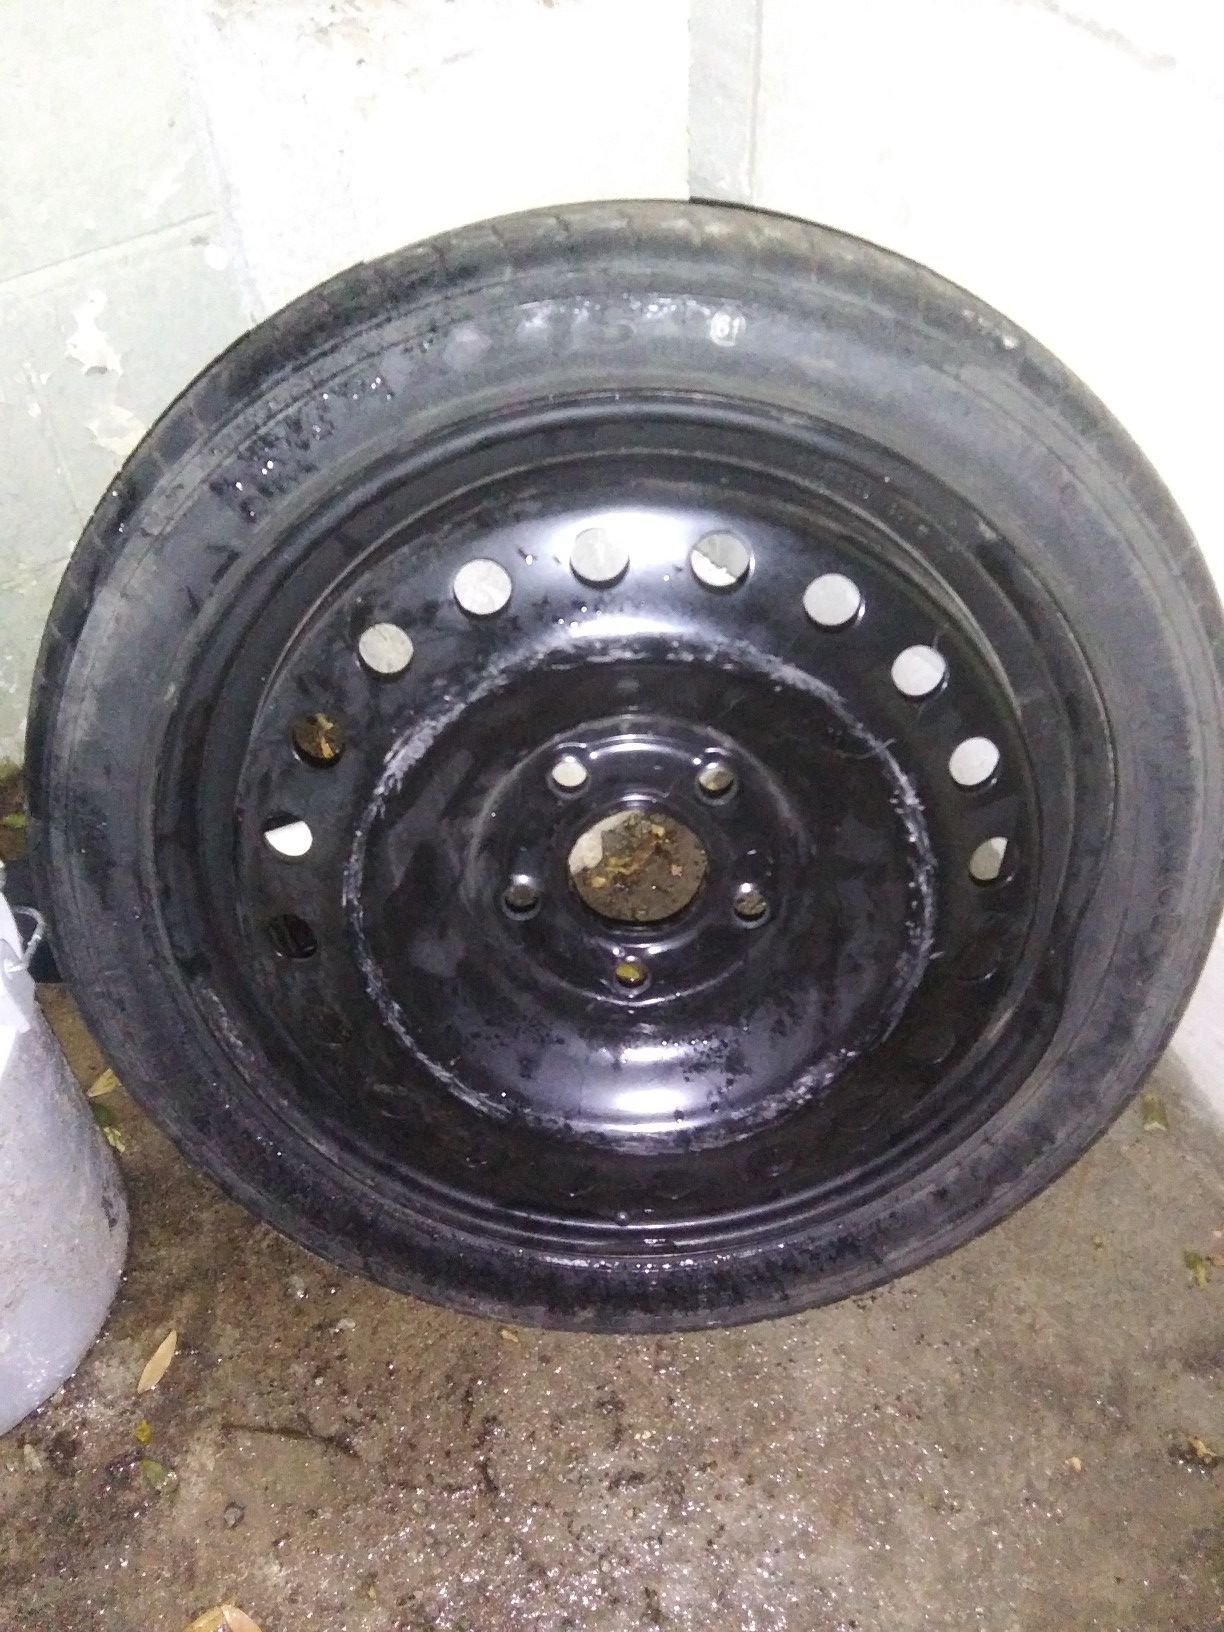 Factory Spare tire and Jack for 2014 Chevy Malibu